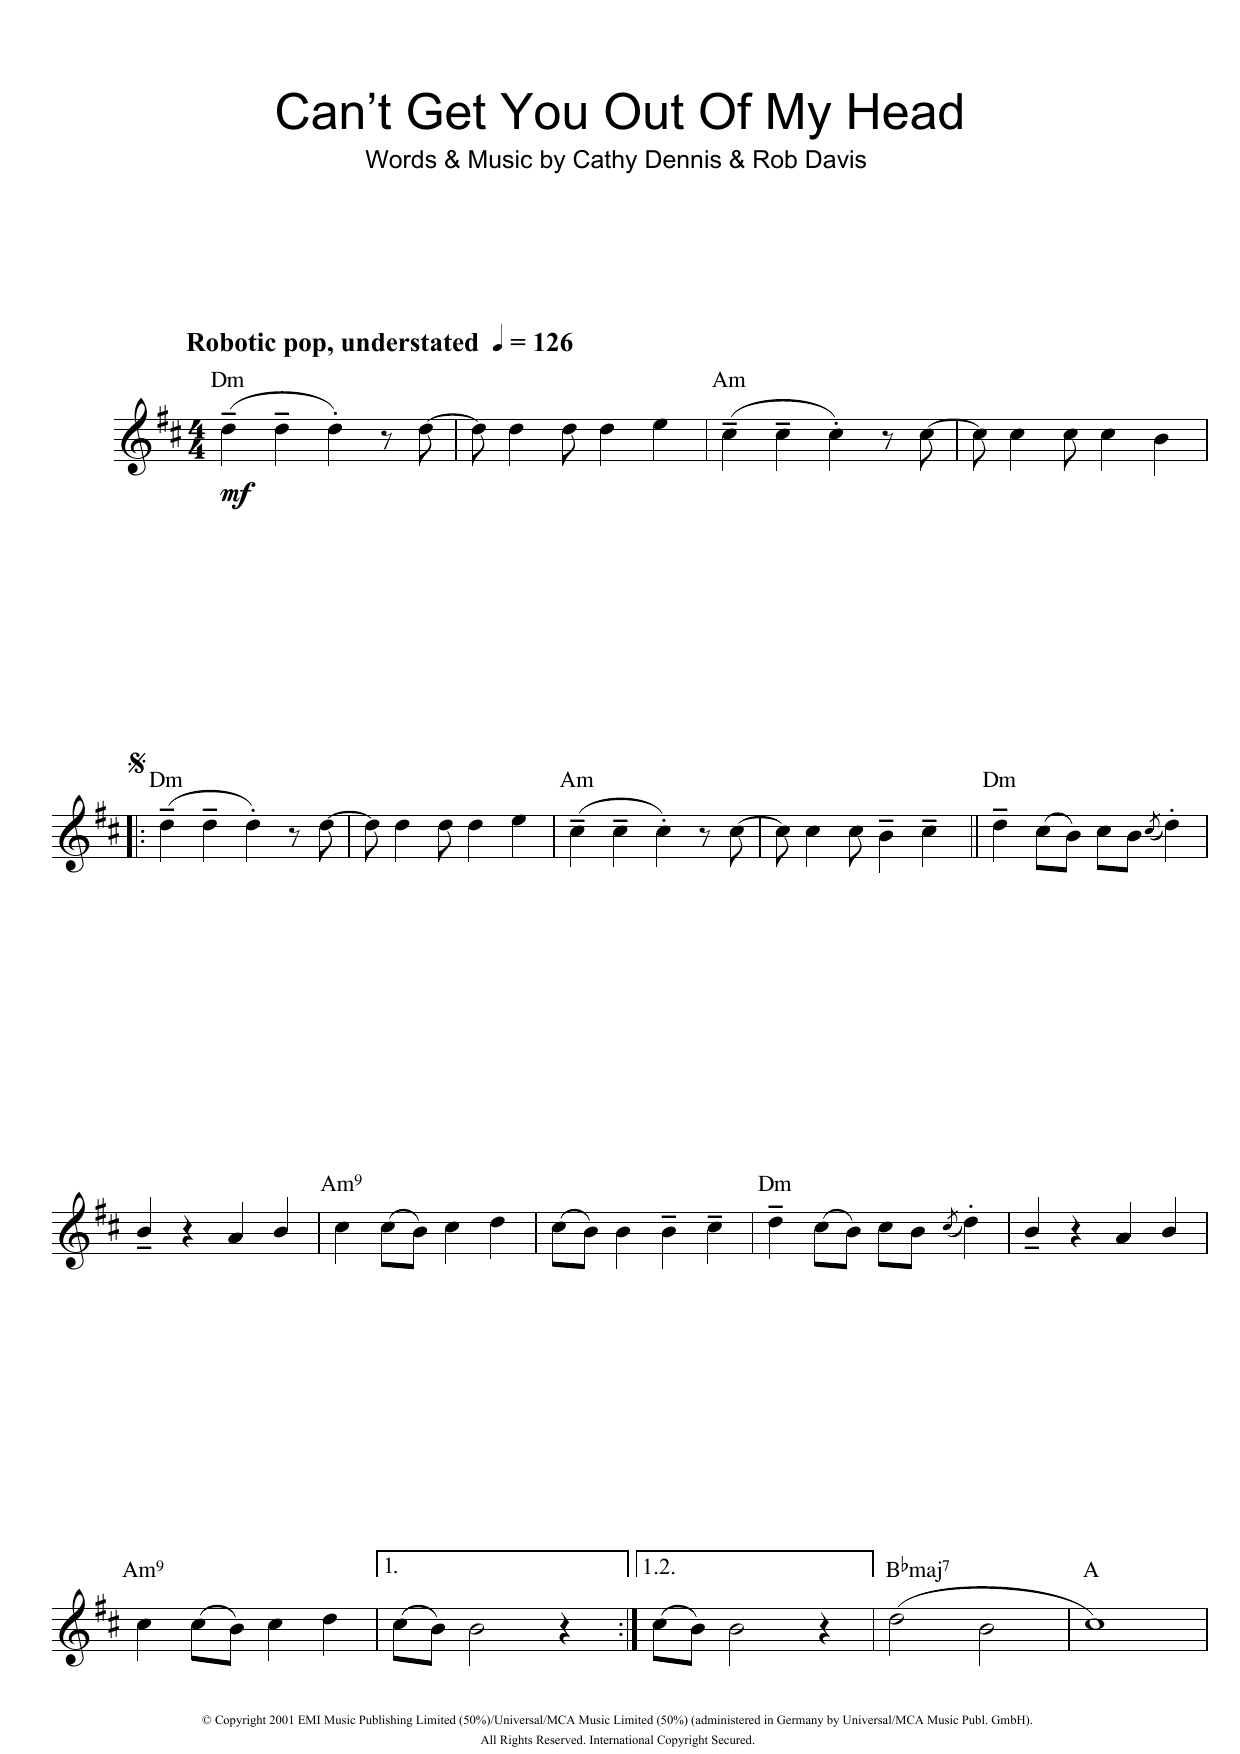 Download Kylie Minogue Can't Get You Out Of My Head Sheet Music